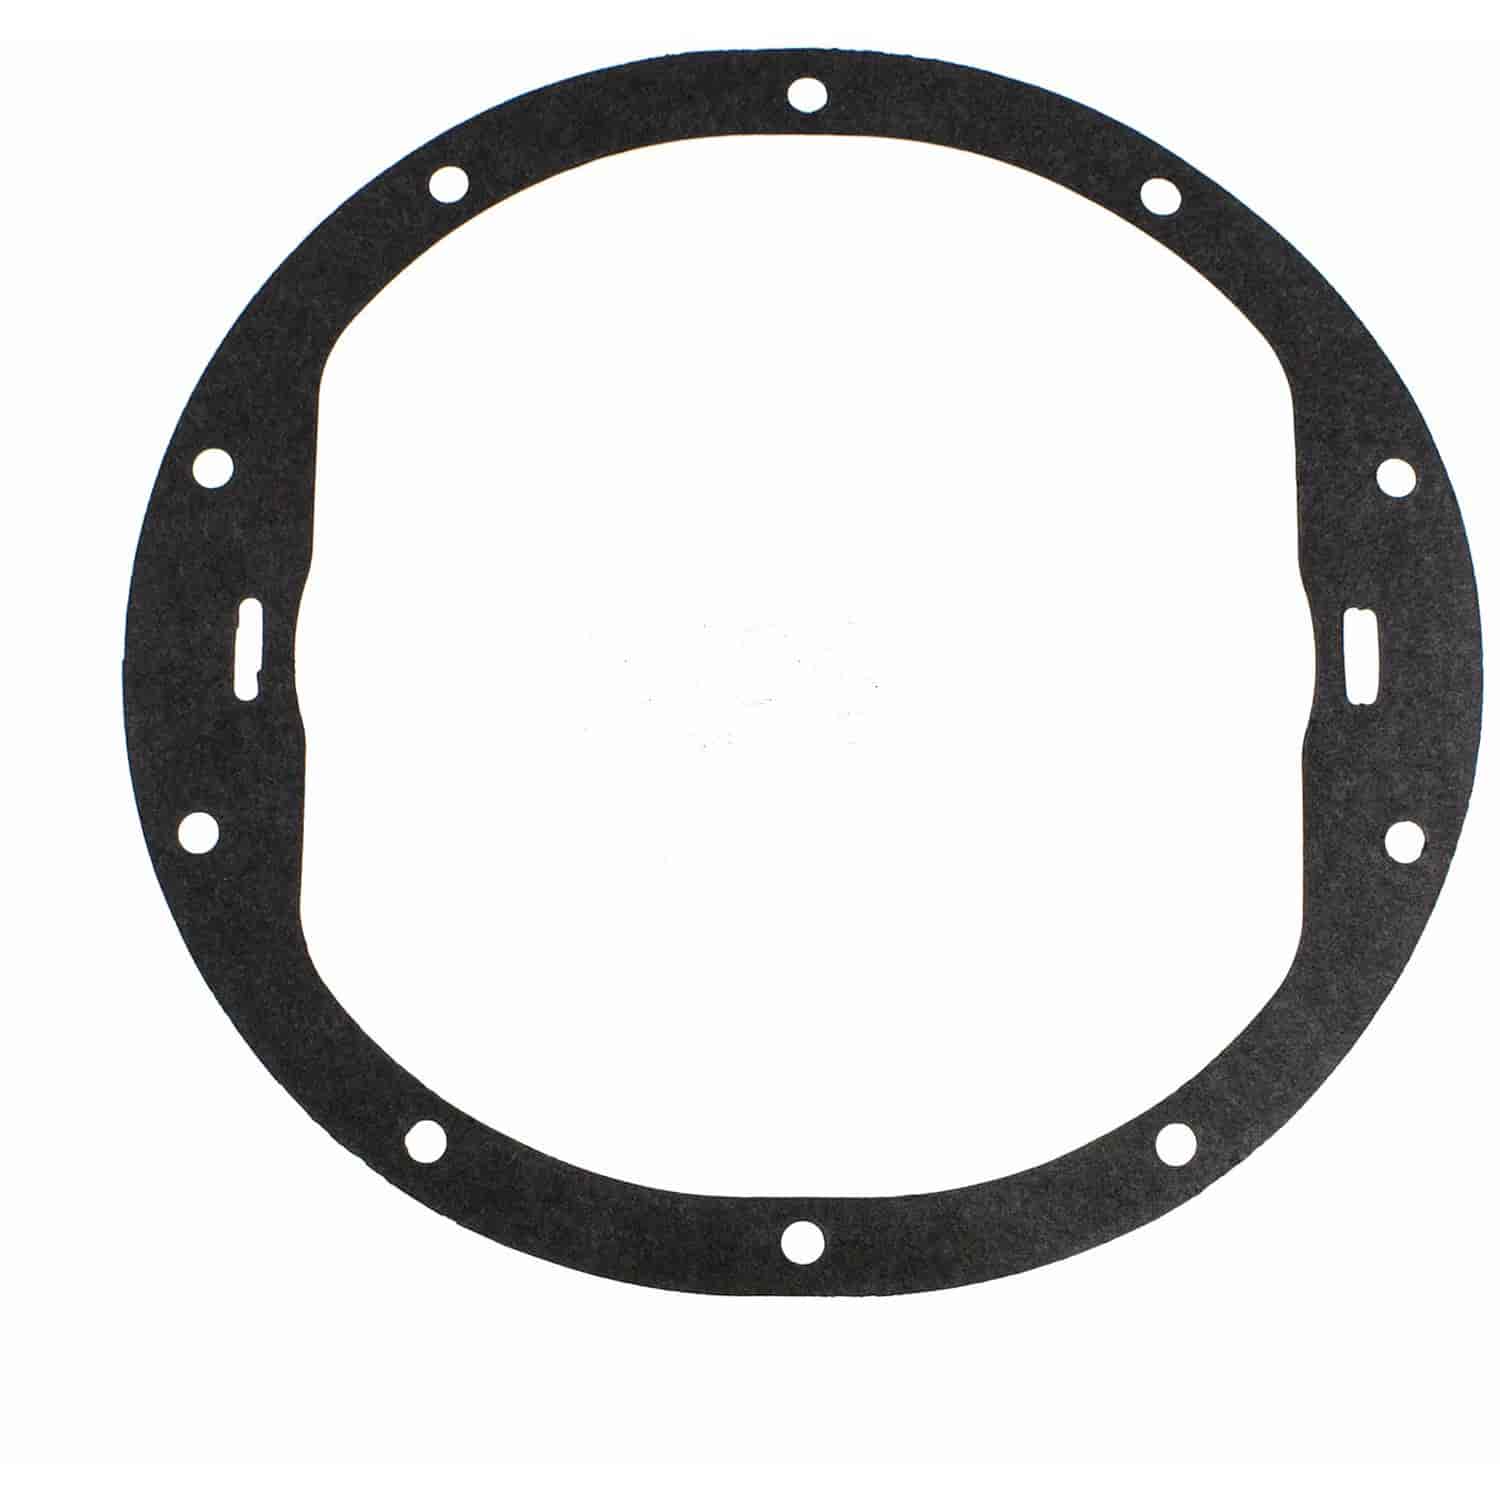 Differential Cover Gasket GM 8.2/8.5/8.625"